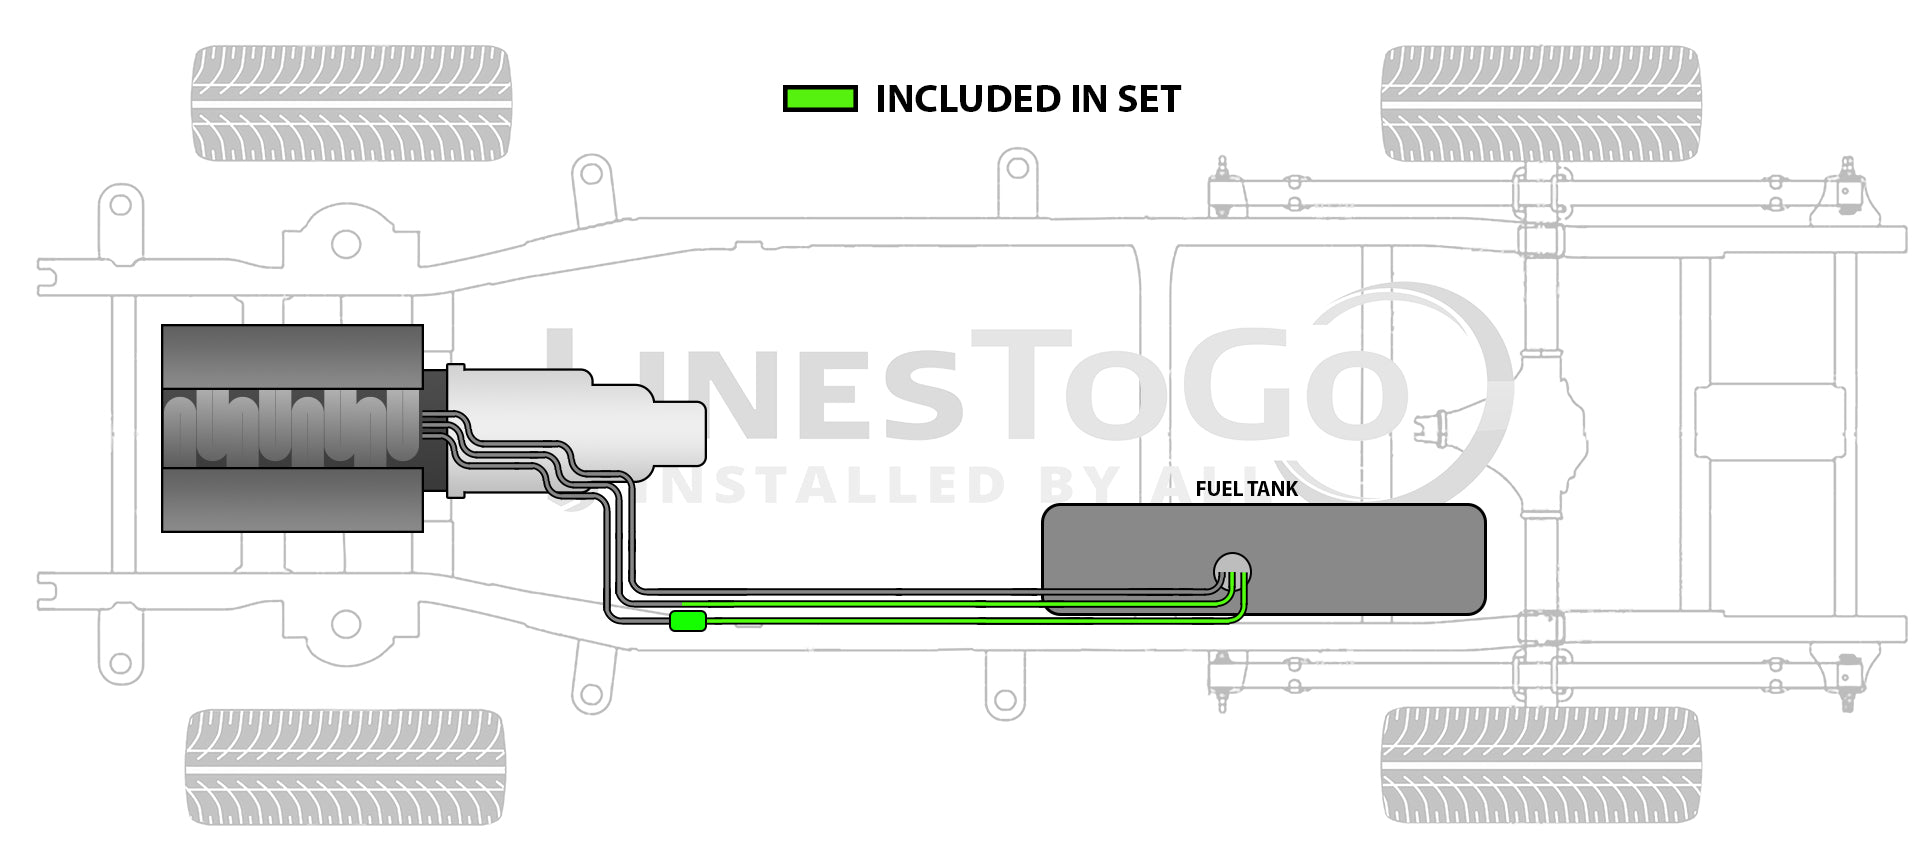 Chevy Truck Rear Fuel Line Set 1993 Reg Cab 6.5 ft Bed 4WD 7.4L Gas SS400-P1R Stainless Steel